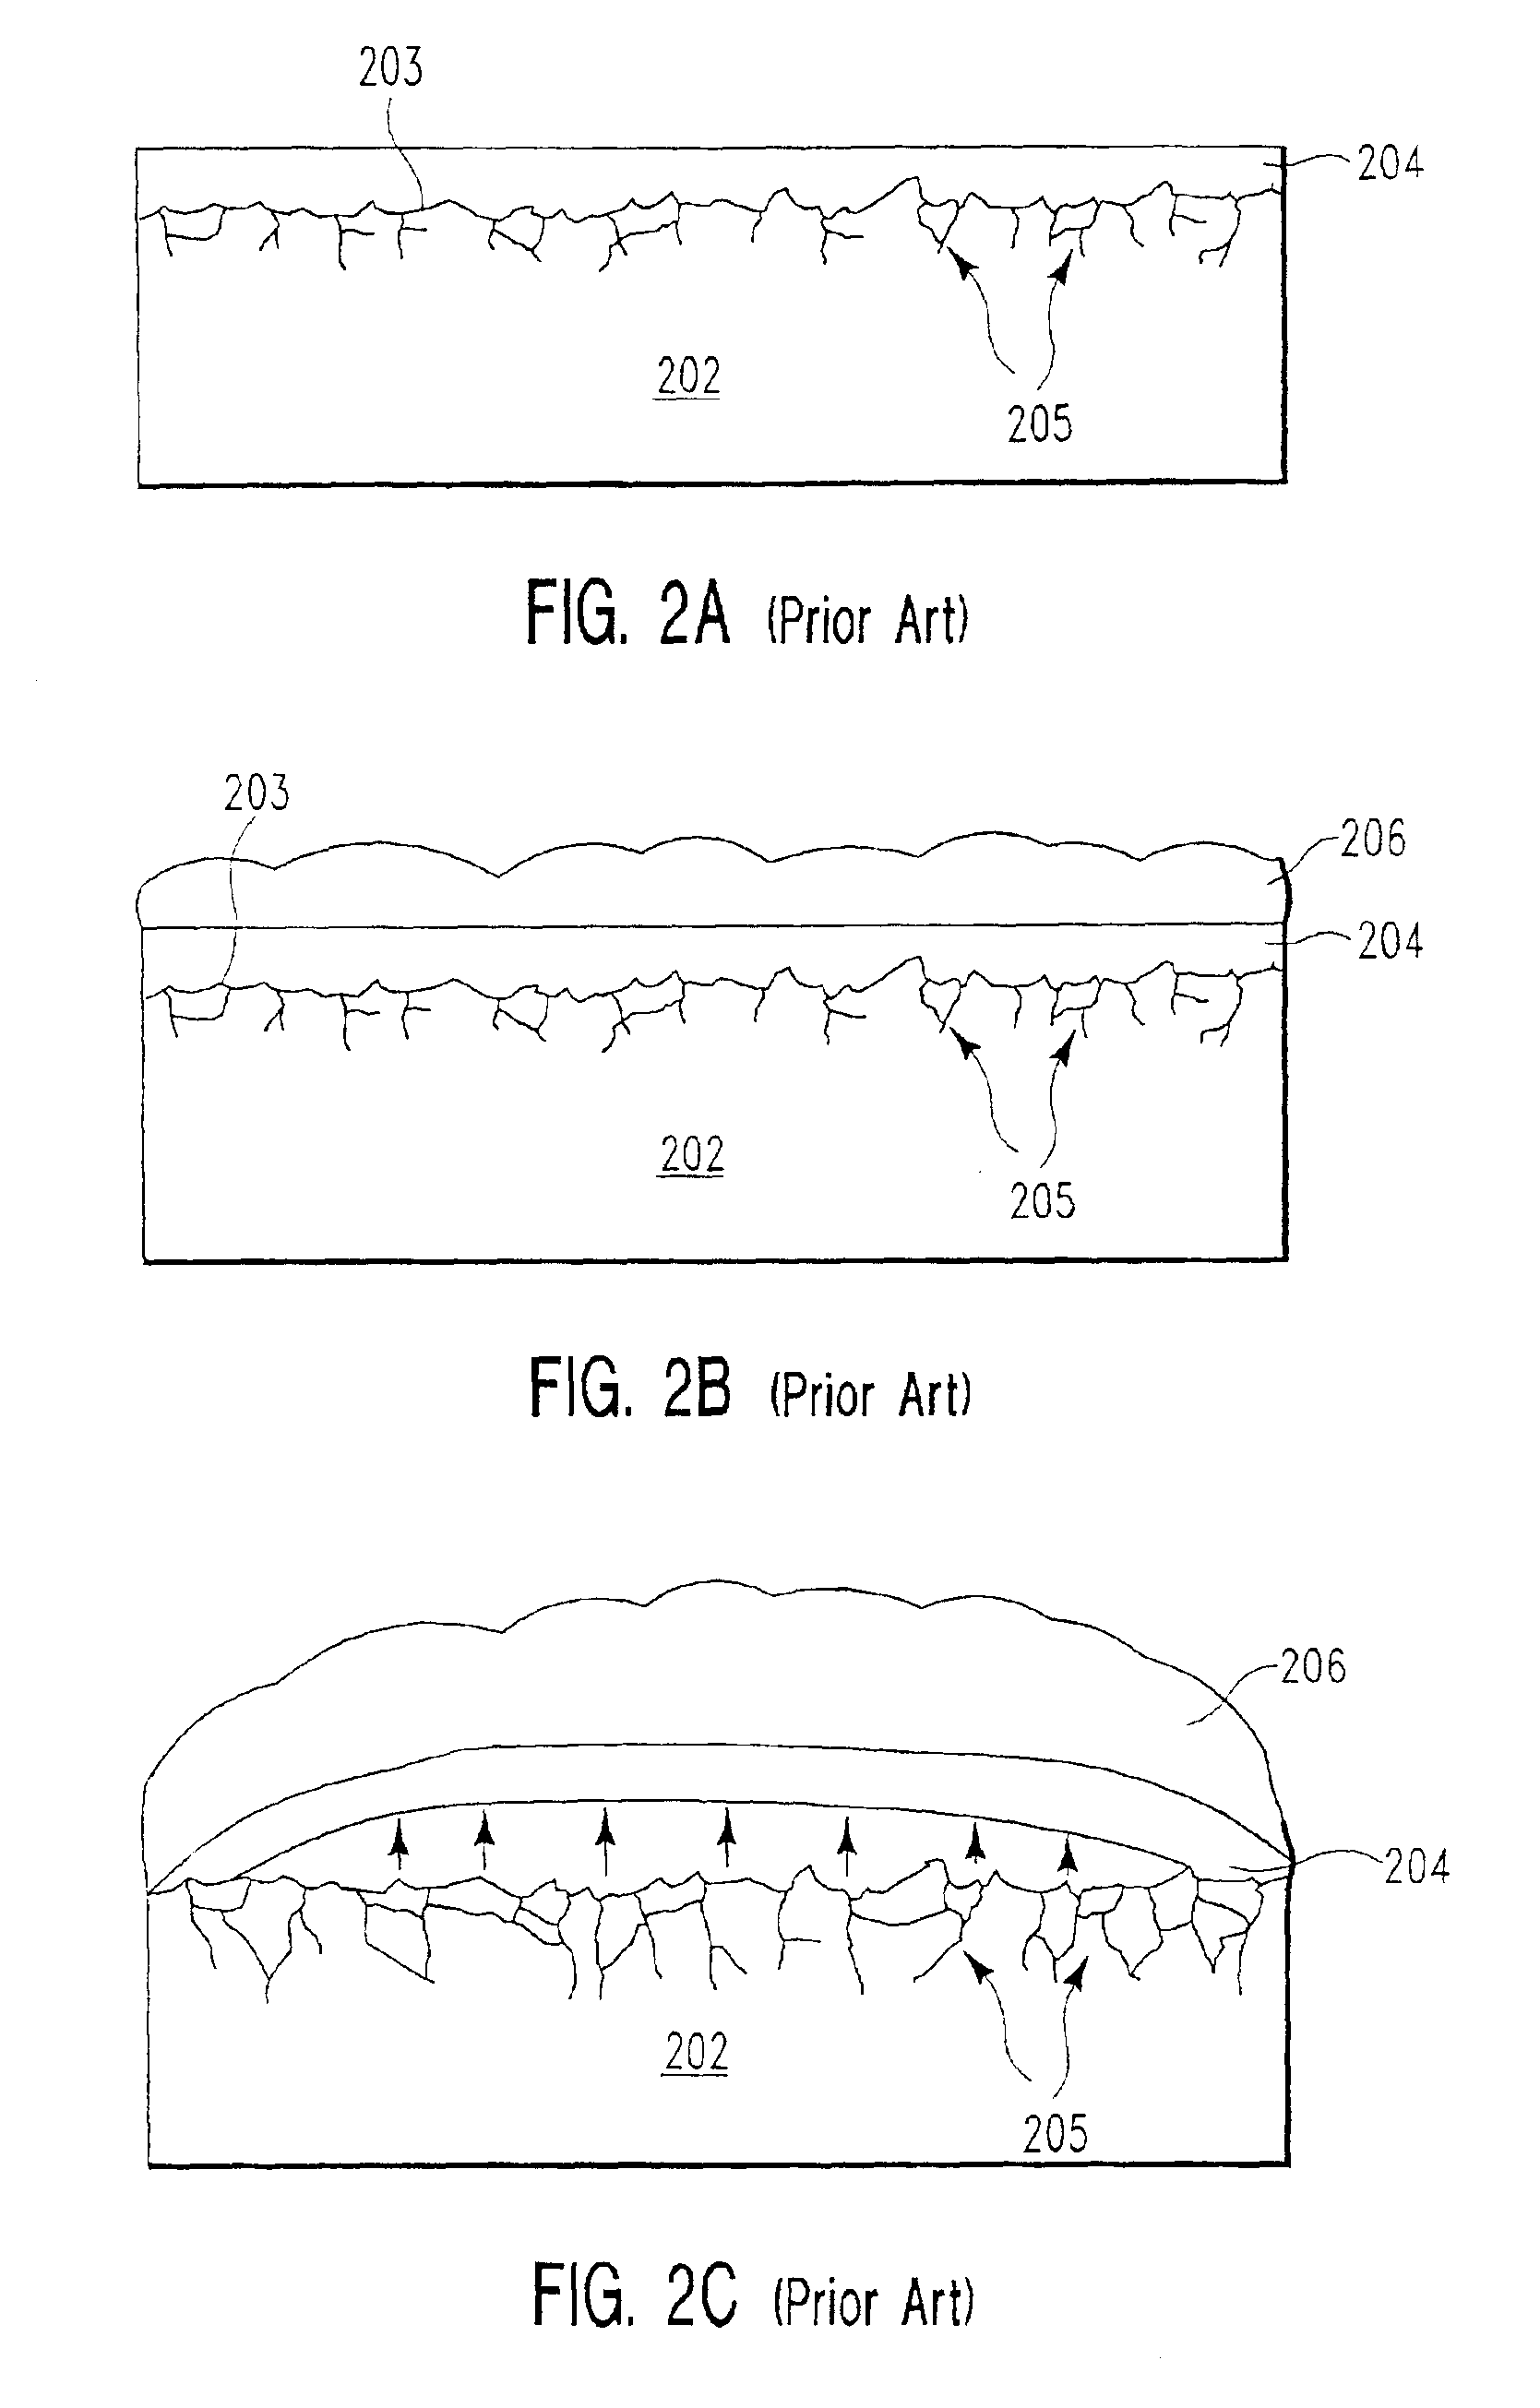 Reusable ceramic-comprising component which includes a scrificial surface layer